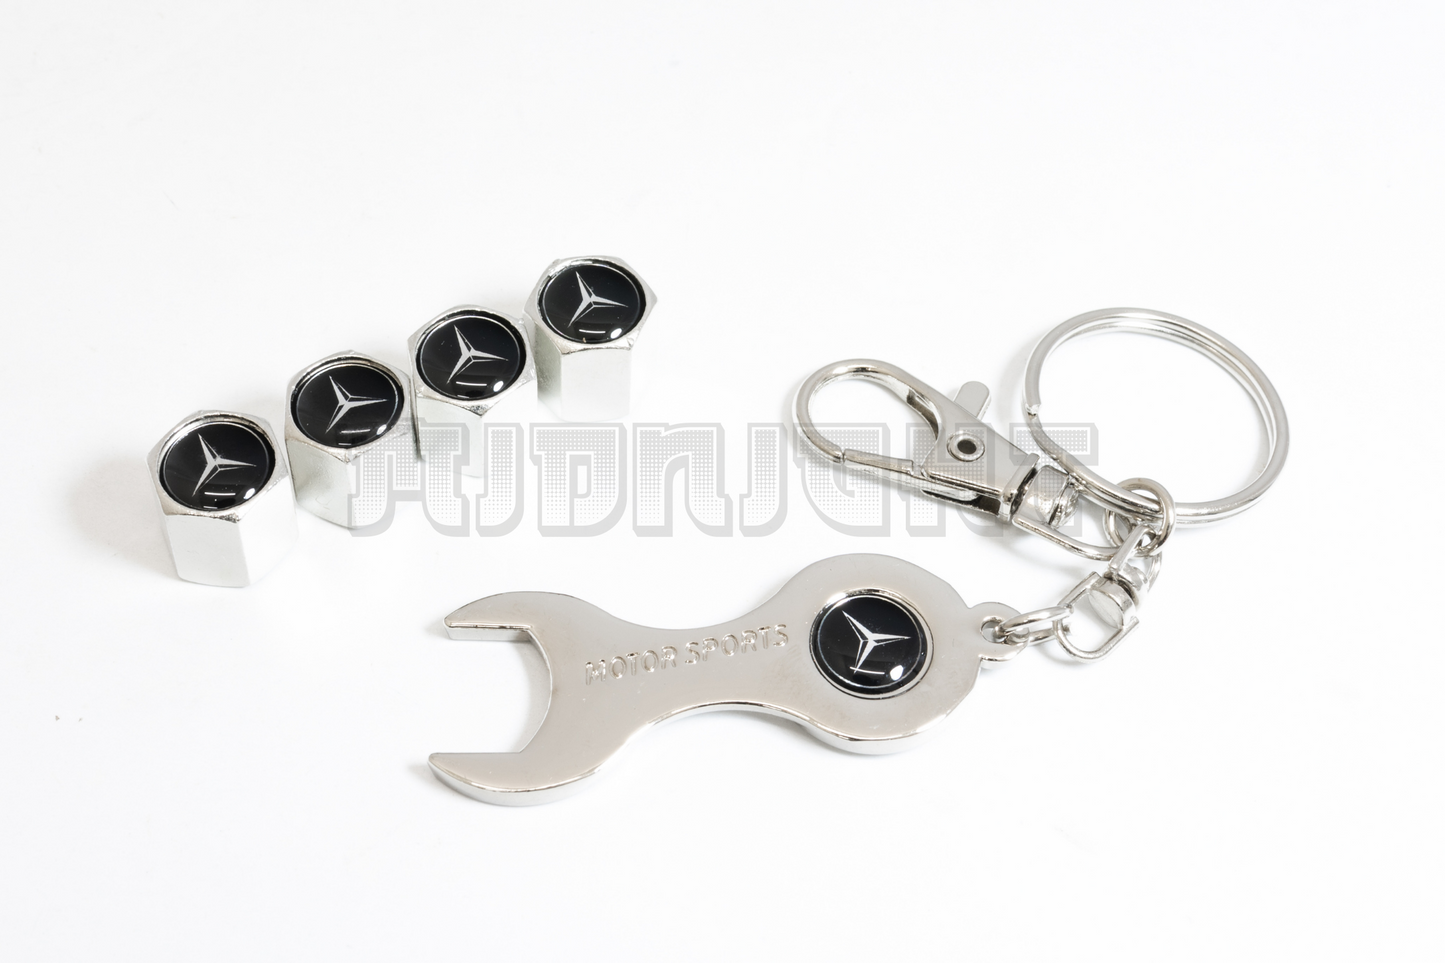 Mercedes Benz Valve Stem Caps With Wrench Keychain